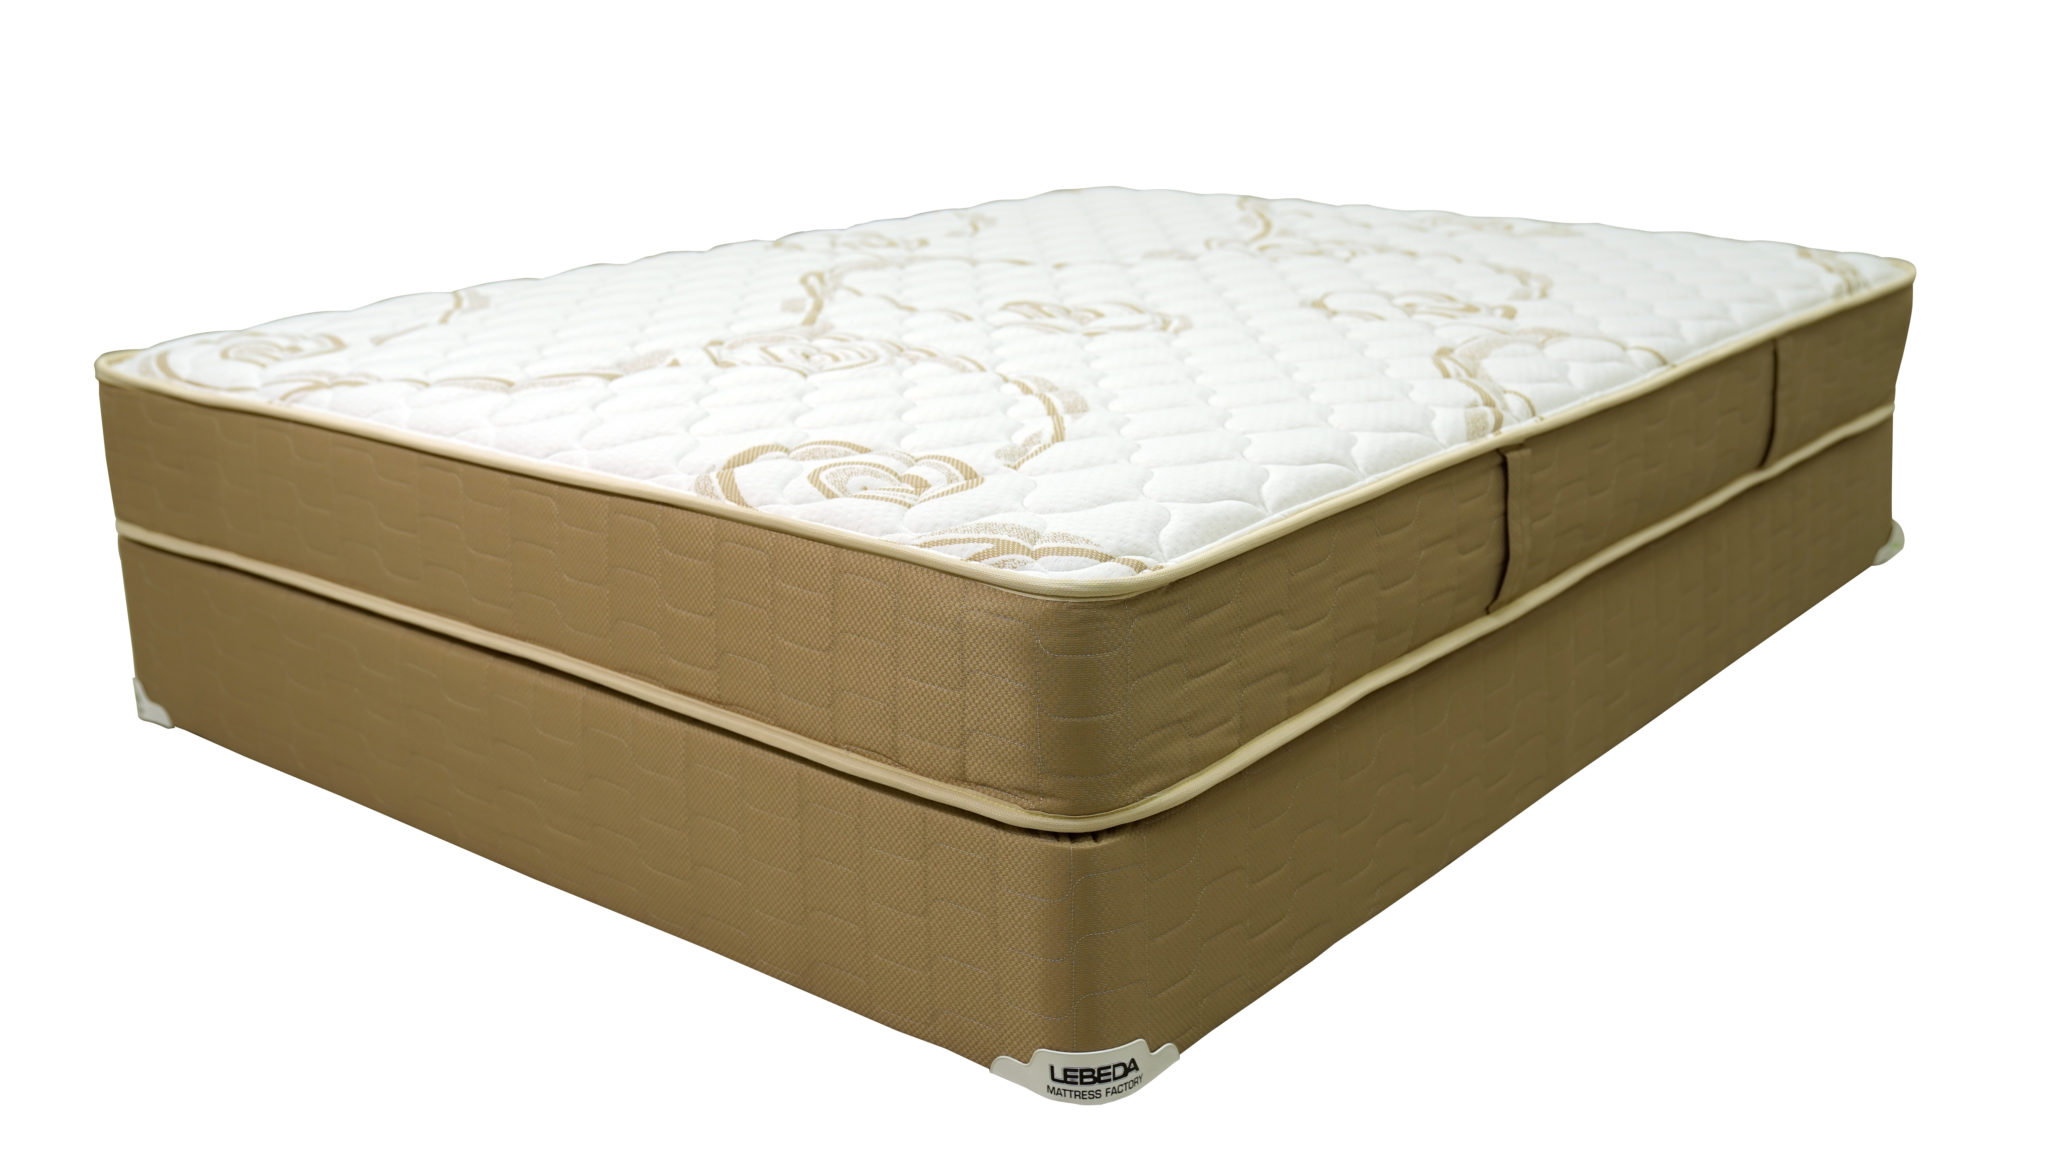 lebeda mattress factory prices